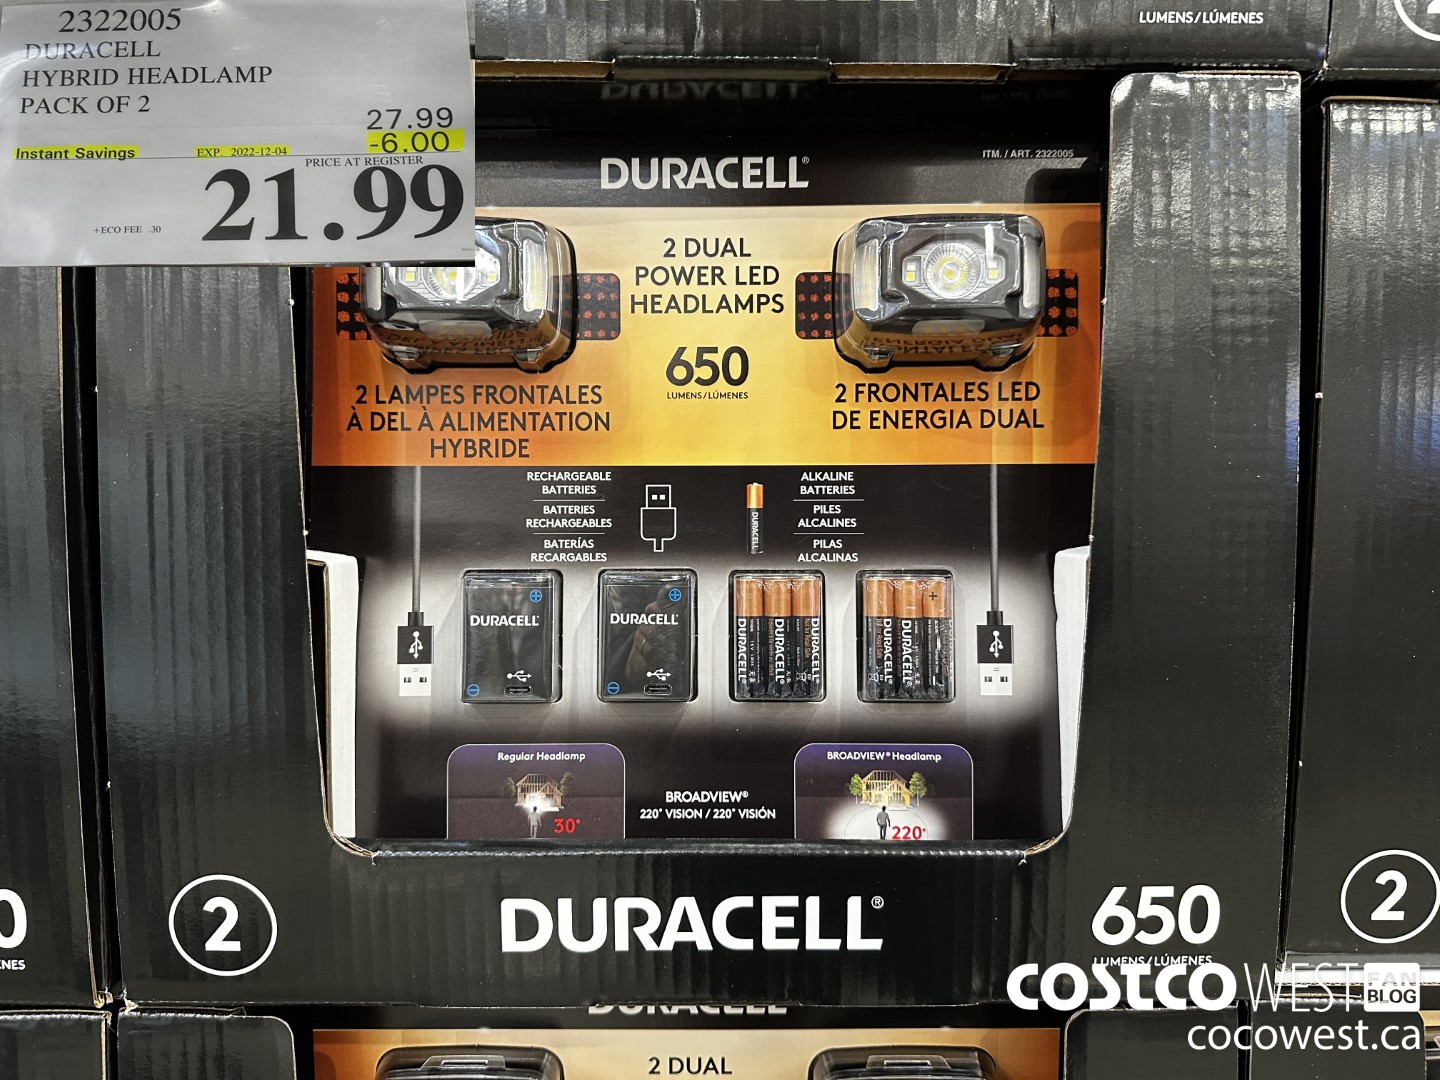 DURACELL HYBRID LANTERN On Sale in COSTCO (Exp. May 14, 2023) #costco 